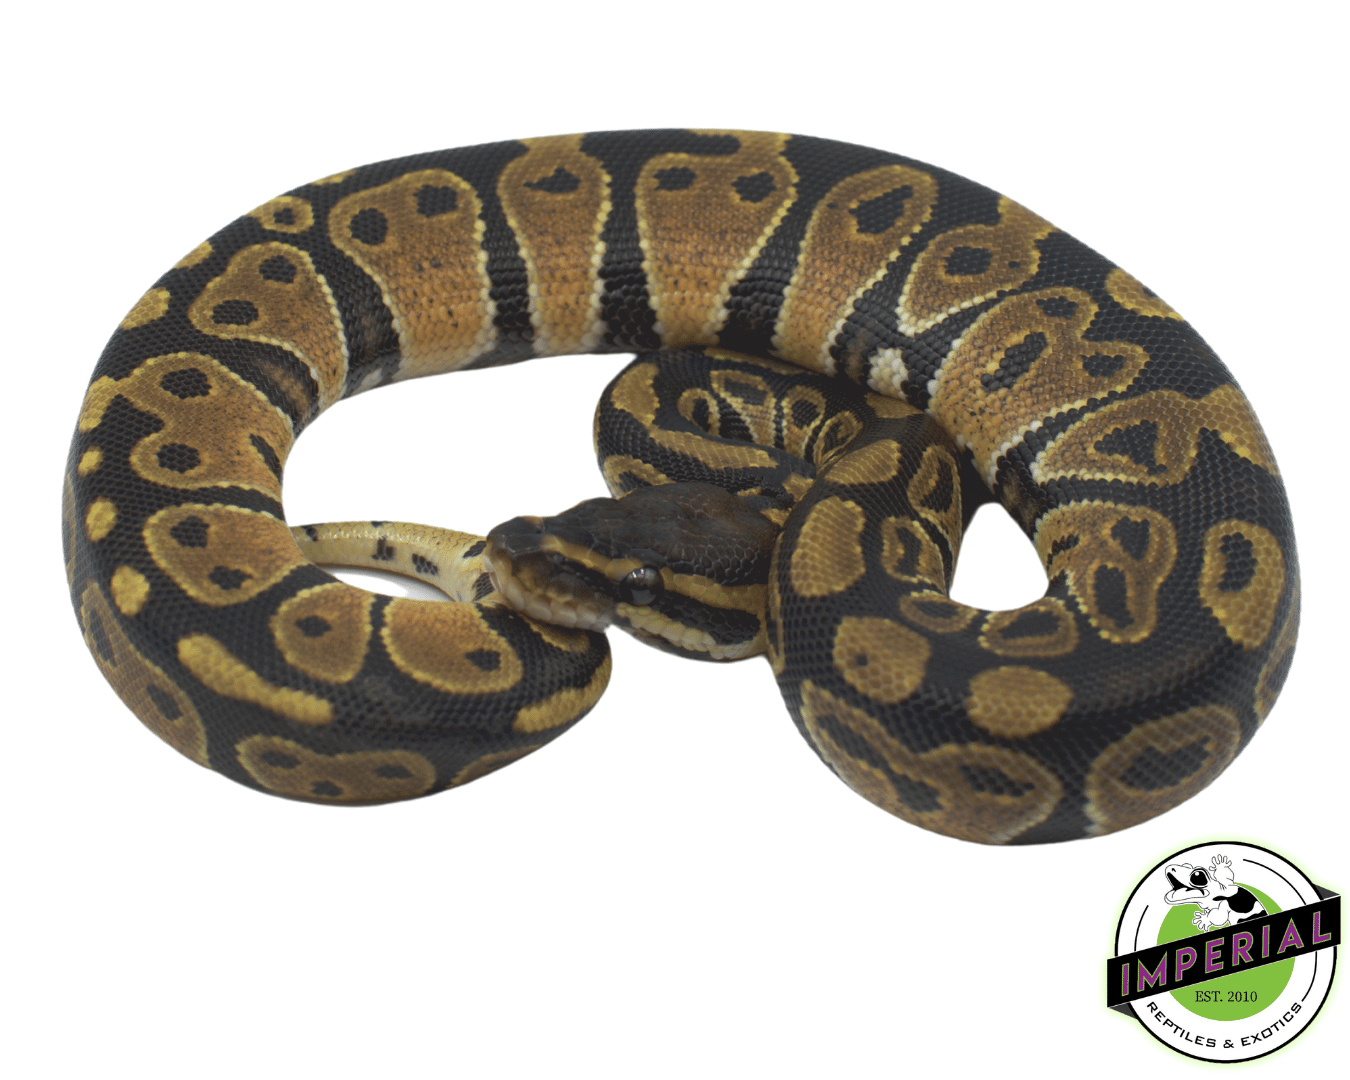 het albino ball python for sale at cheap prices. buy ball pythons online near me